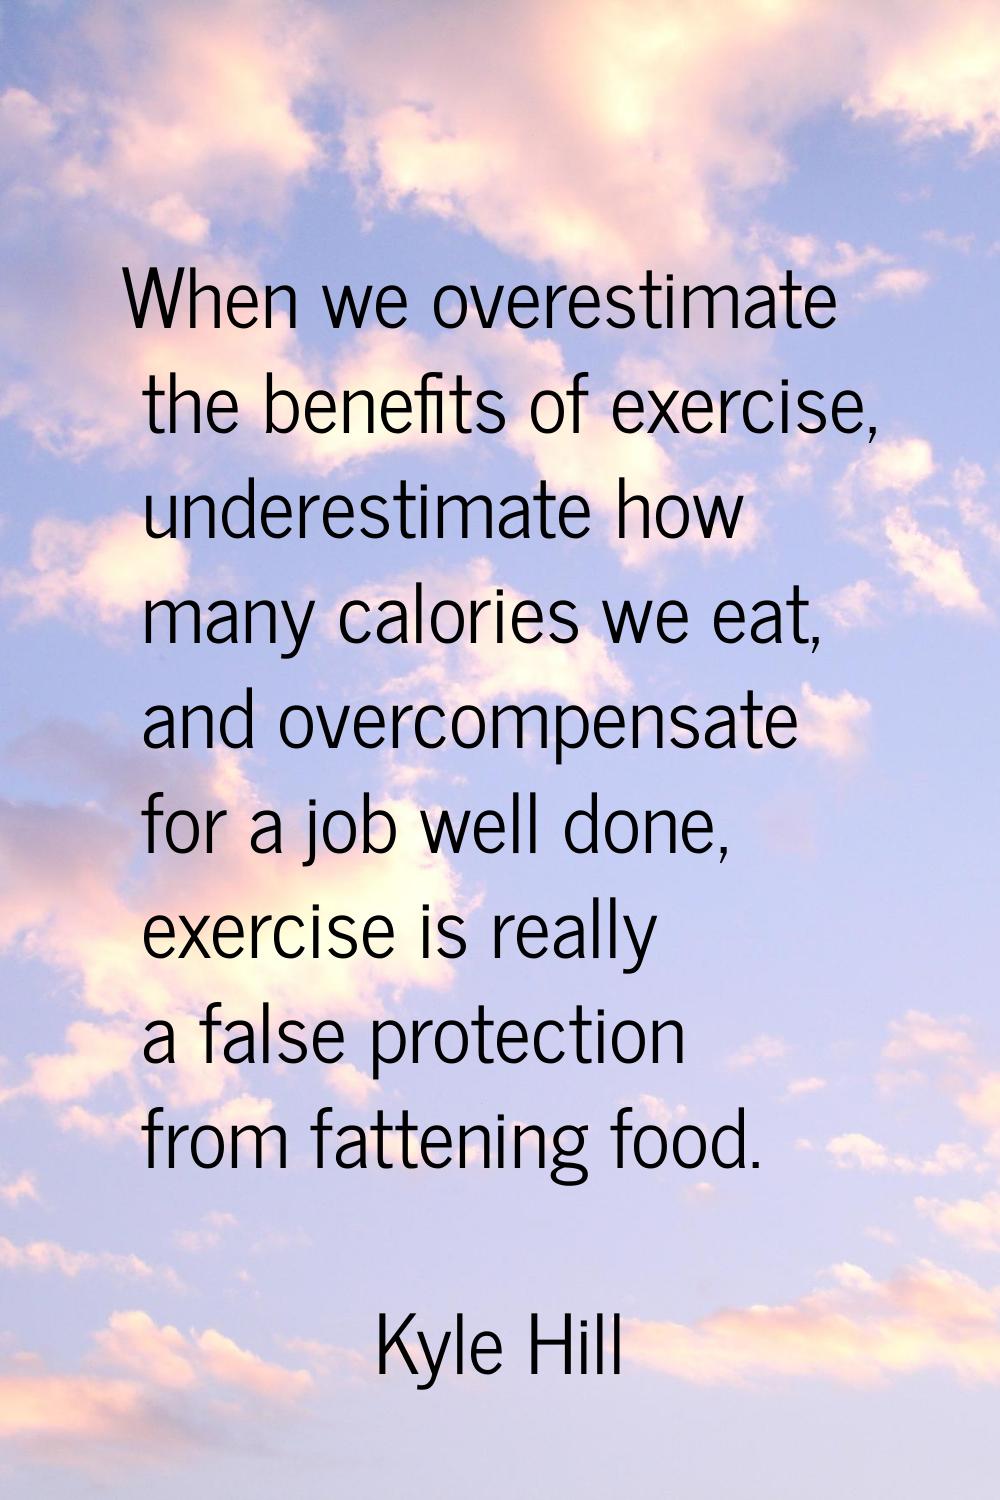 When we overestimate the benefits of exercise, underestimate how many calories we eat, and overcomp